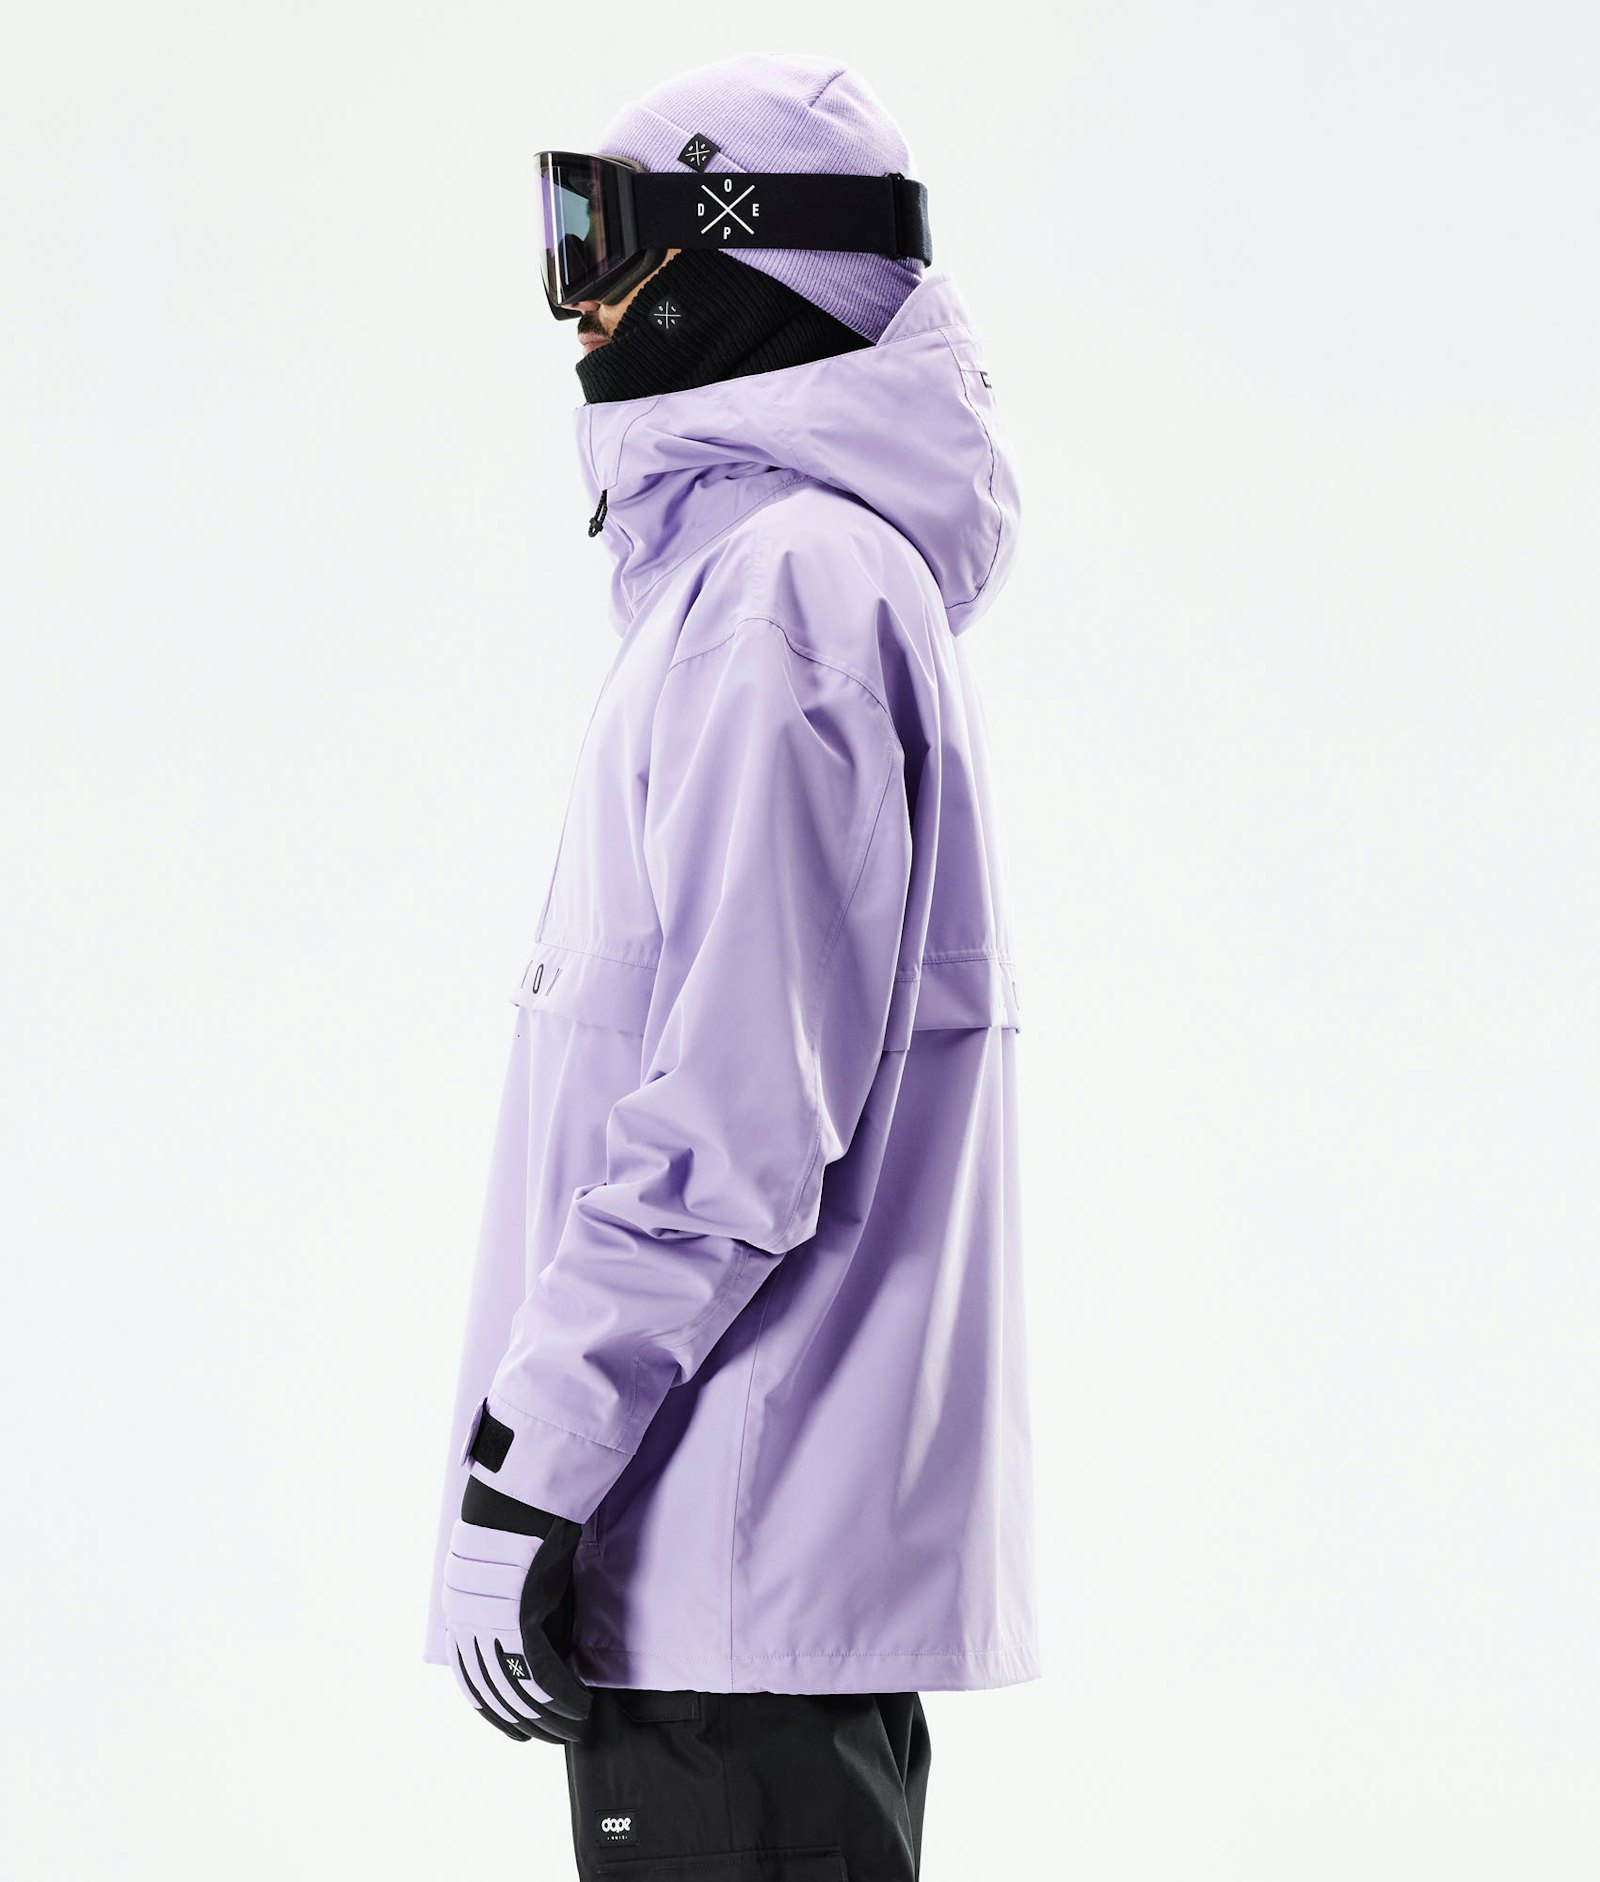 Legacy 2021 Snowboard jas Heren Faded Violet